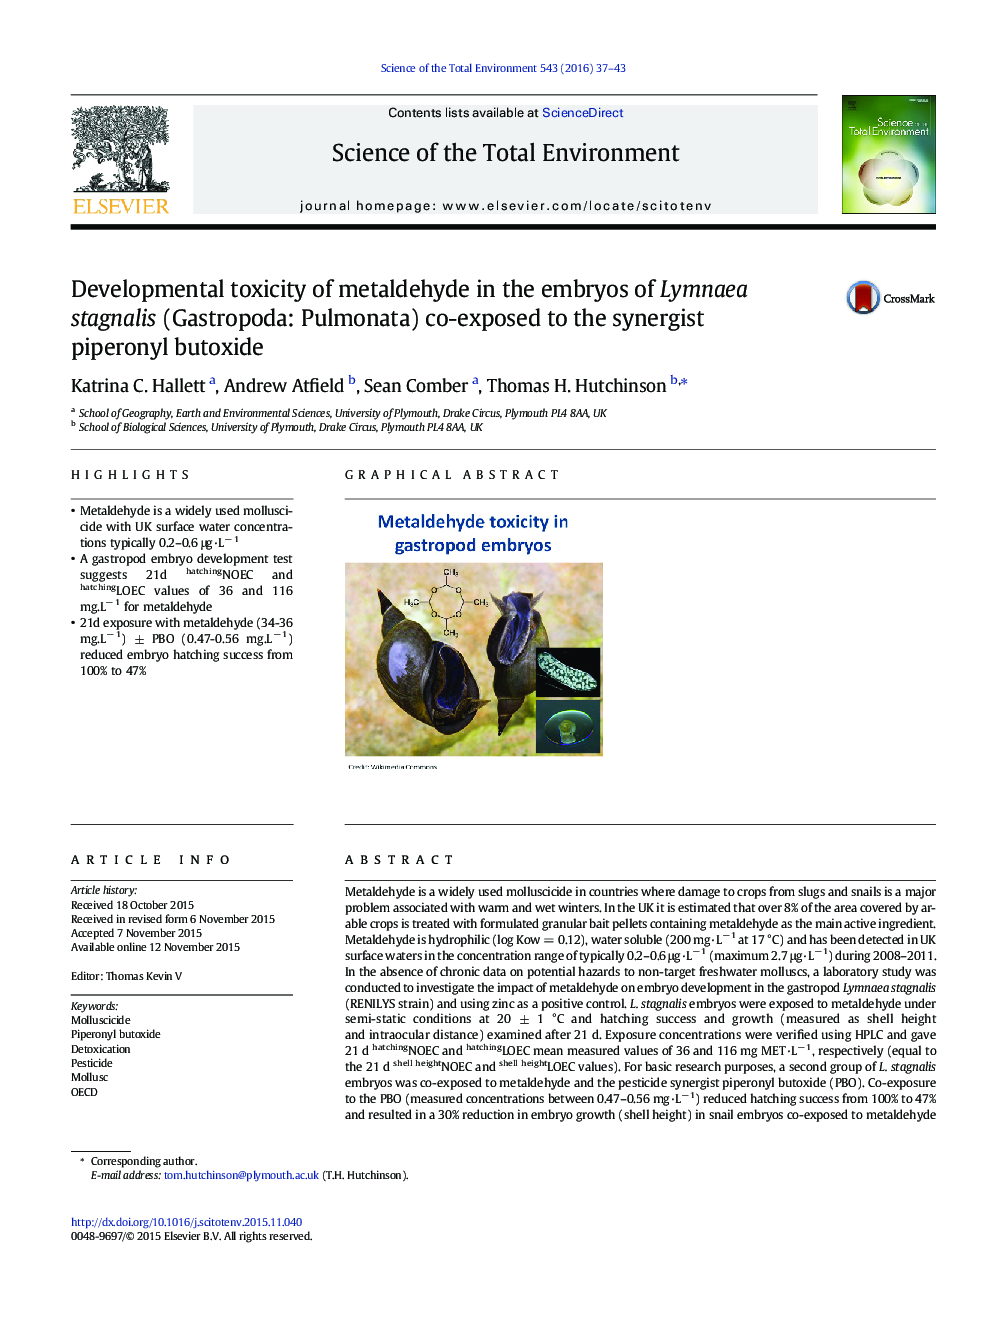 Developmental toxicity of metaldehyde in the embryos of Lymnaea stagnalis (Gastropoda: Pulmonata) co-exposed to the synergist piperonyl butoxide